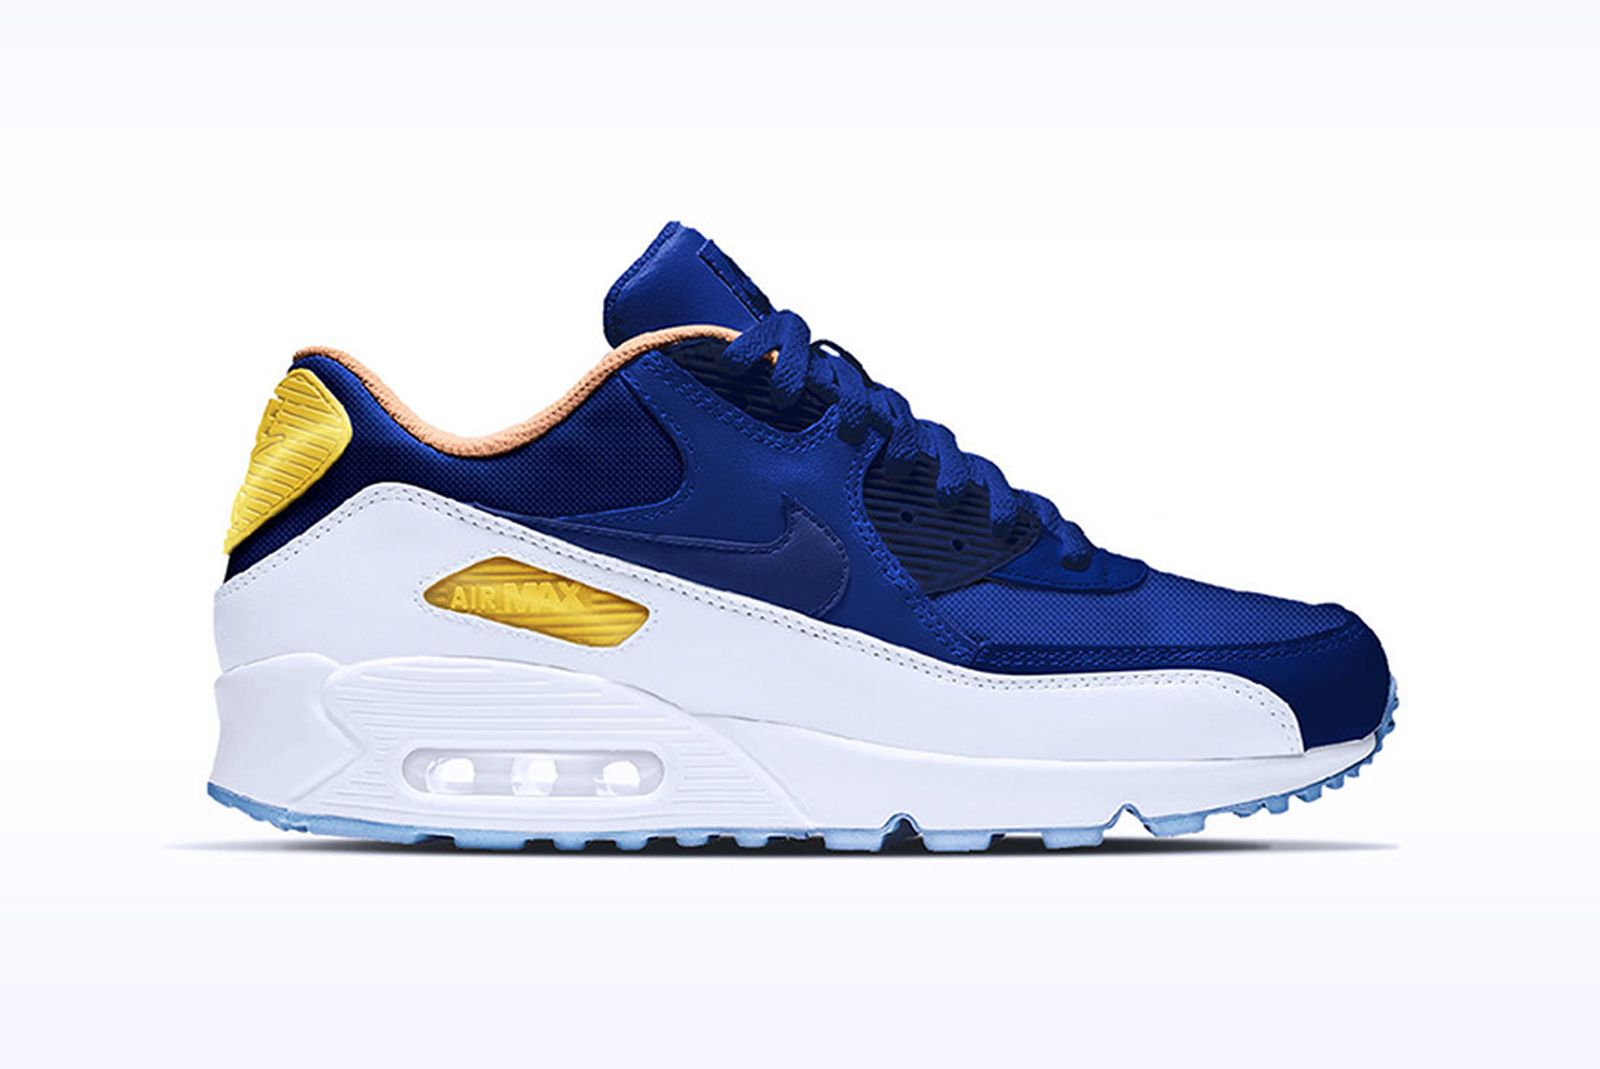 Dochter doel metro These 'Dragon Ball Z' x Nike Concept Sneakers Are Incredible